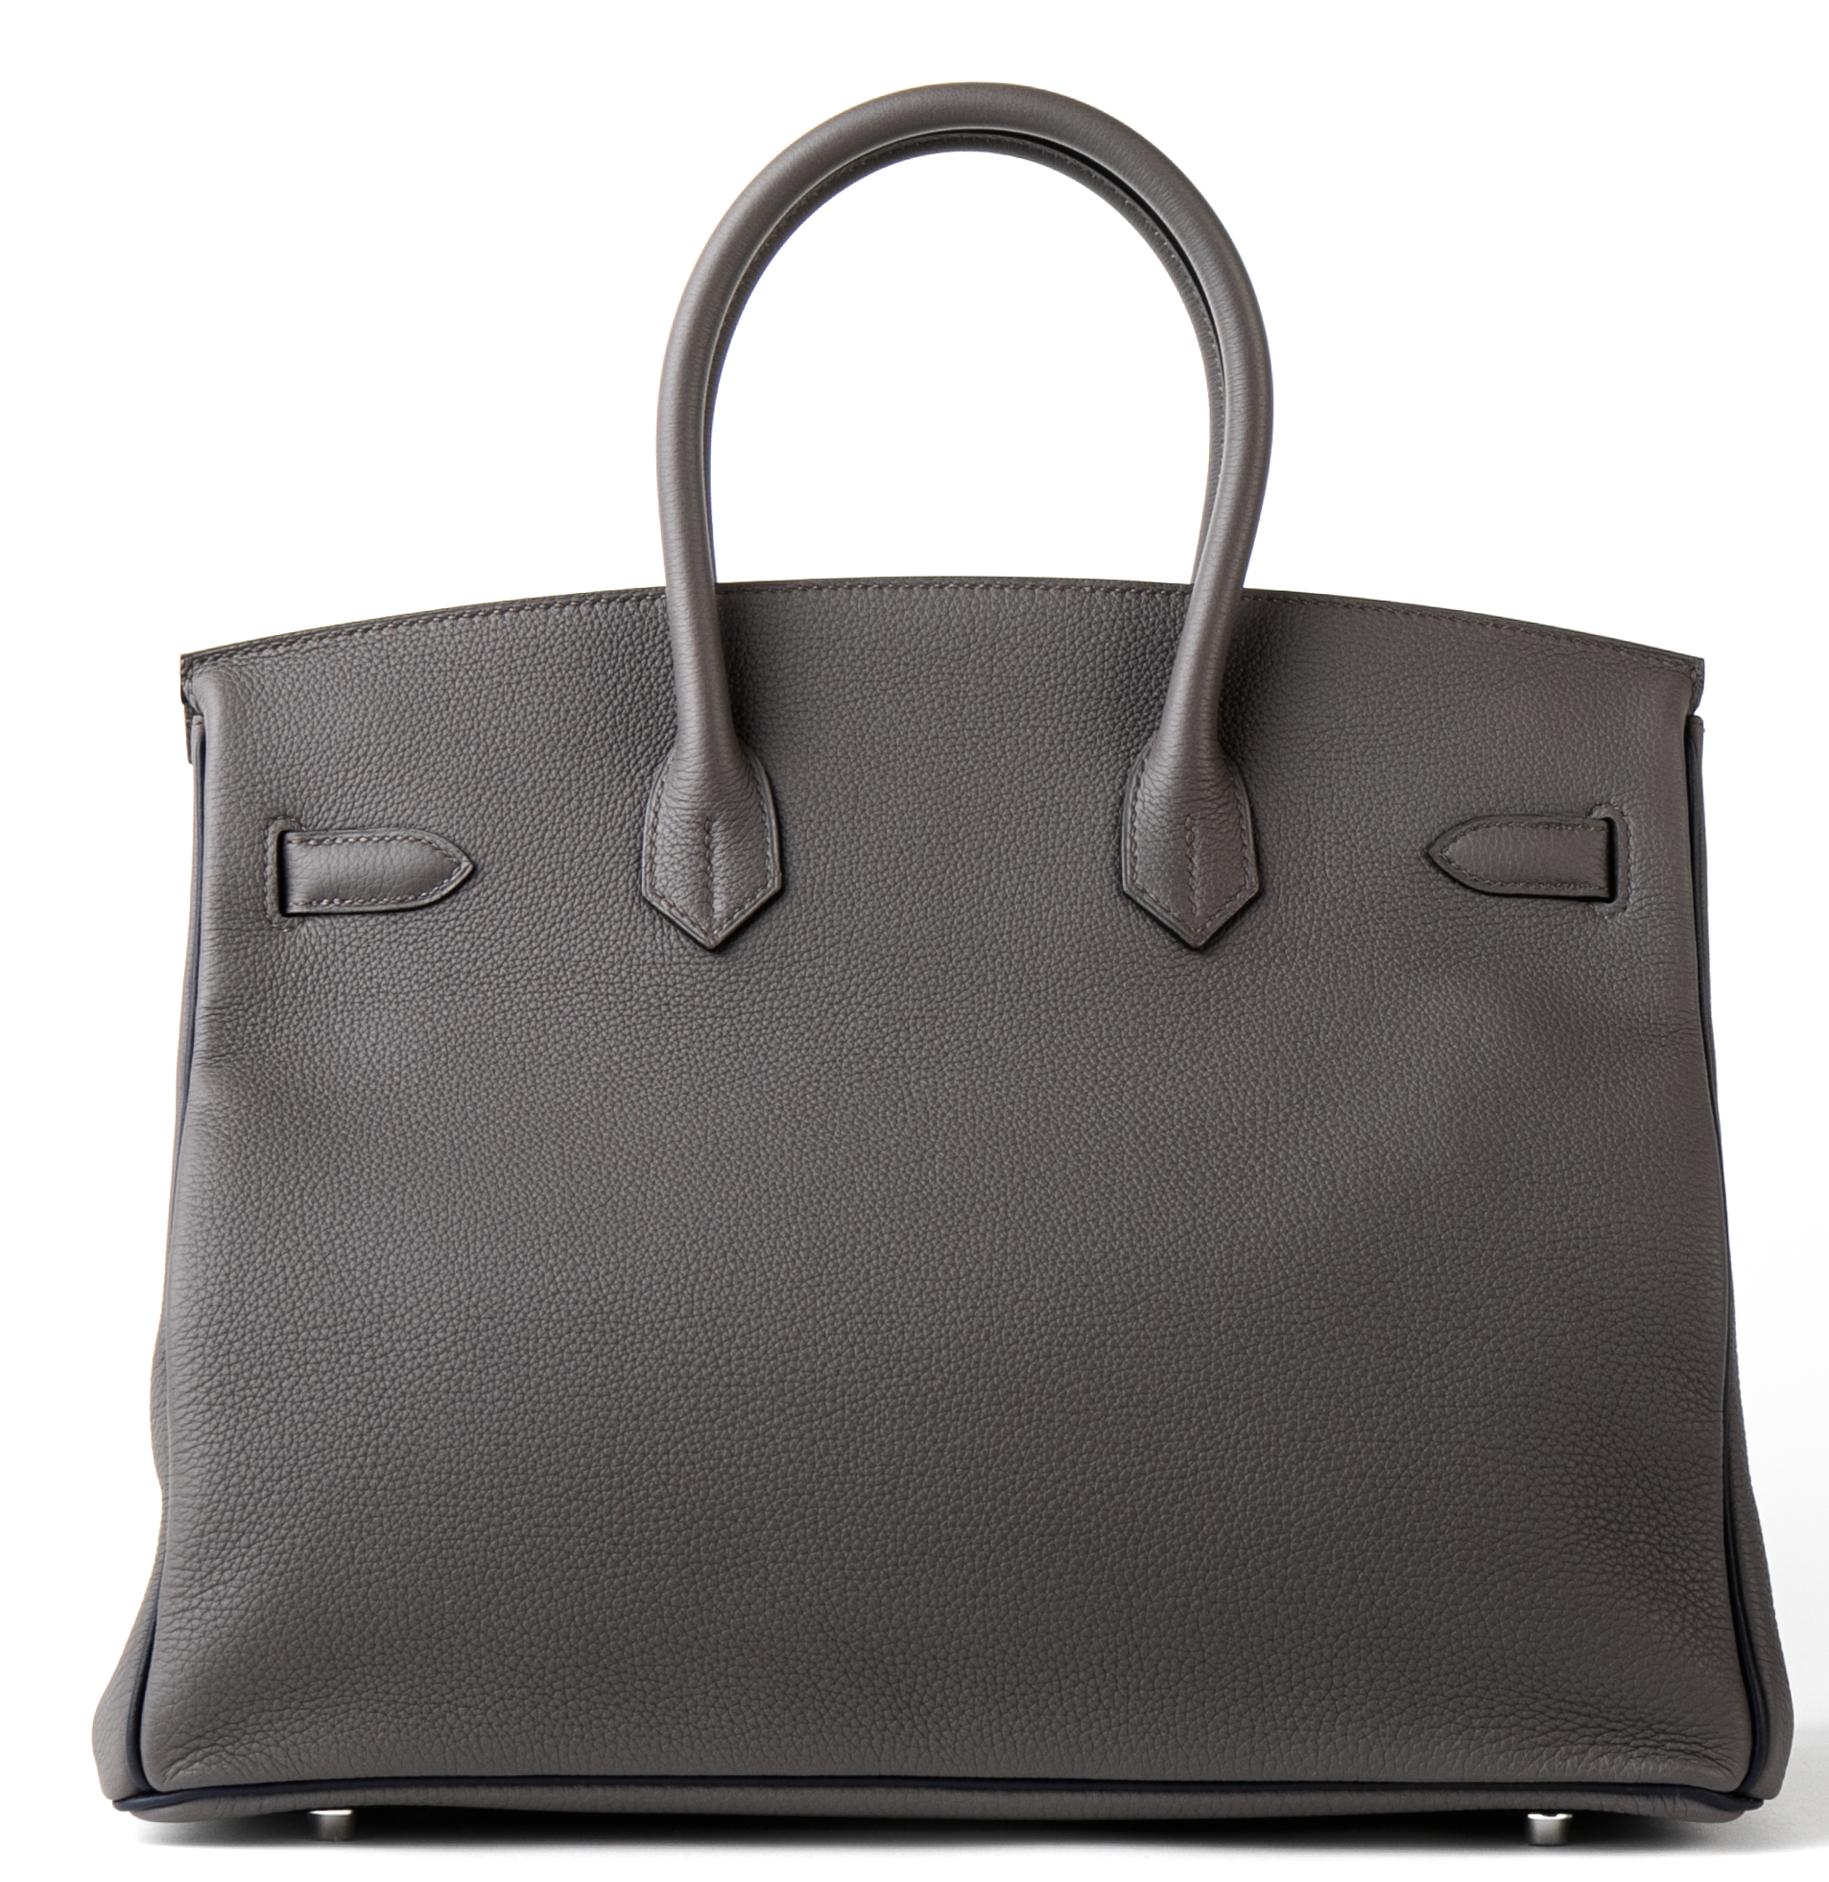 Hermes Special Order horseshoe stamped (HSS) bi-color Etain and Blue Nuit Birkin 35cm of togo leather with palladium hardware.

 

This Gris Etain Birkin has Blue Nuit (dark blue) trim on sides and bottom, tonal stitching,  front toggle closure,